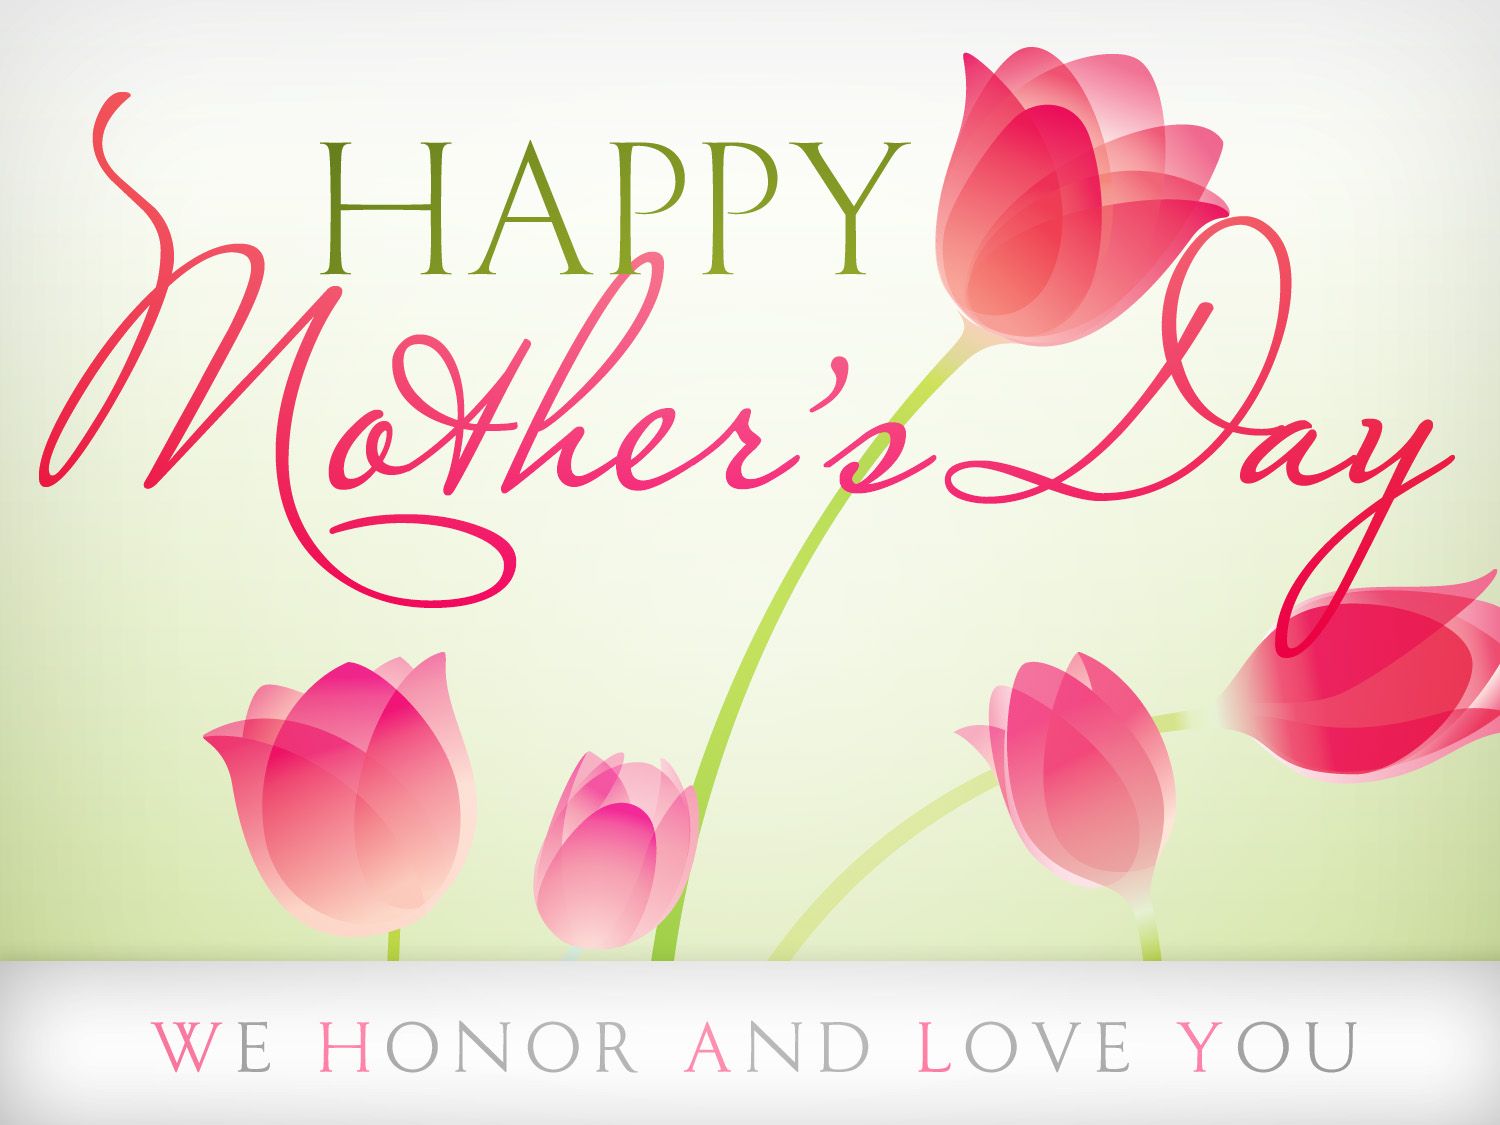 Happy Mothers Day 2019 Poem Quotes From Daughter & Mothers